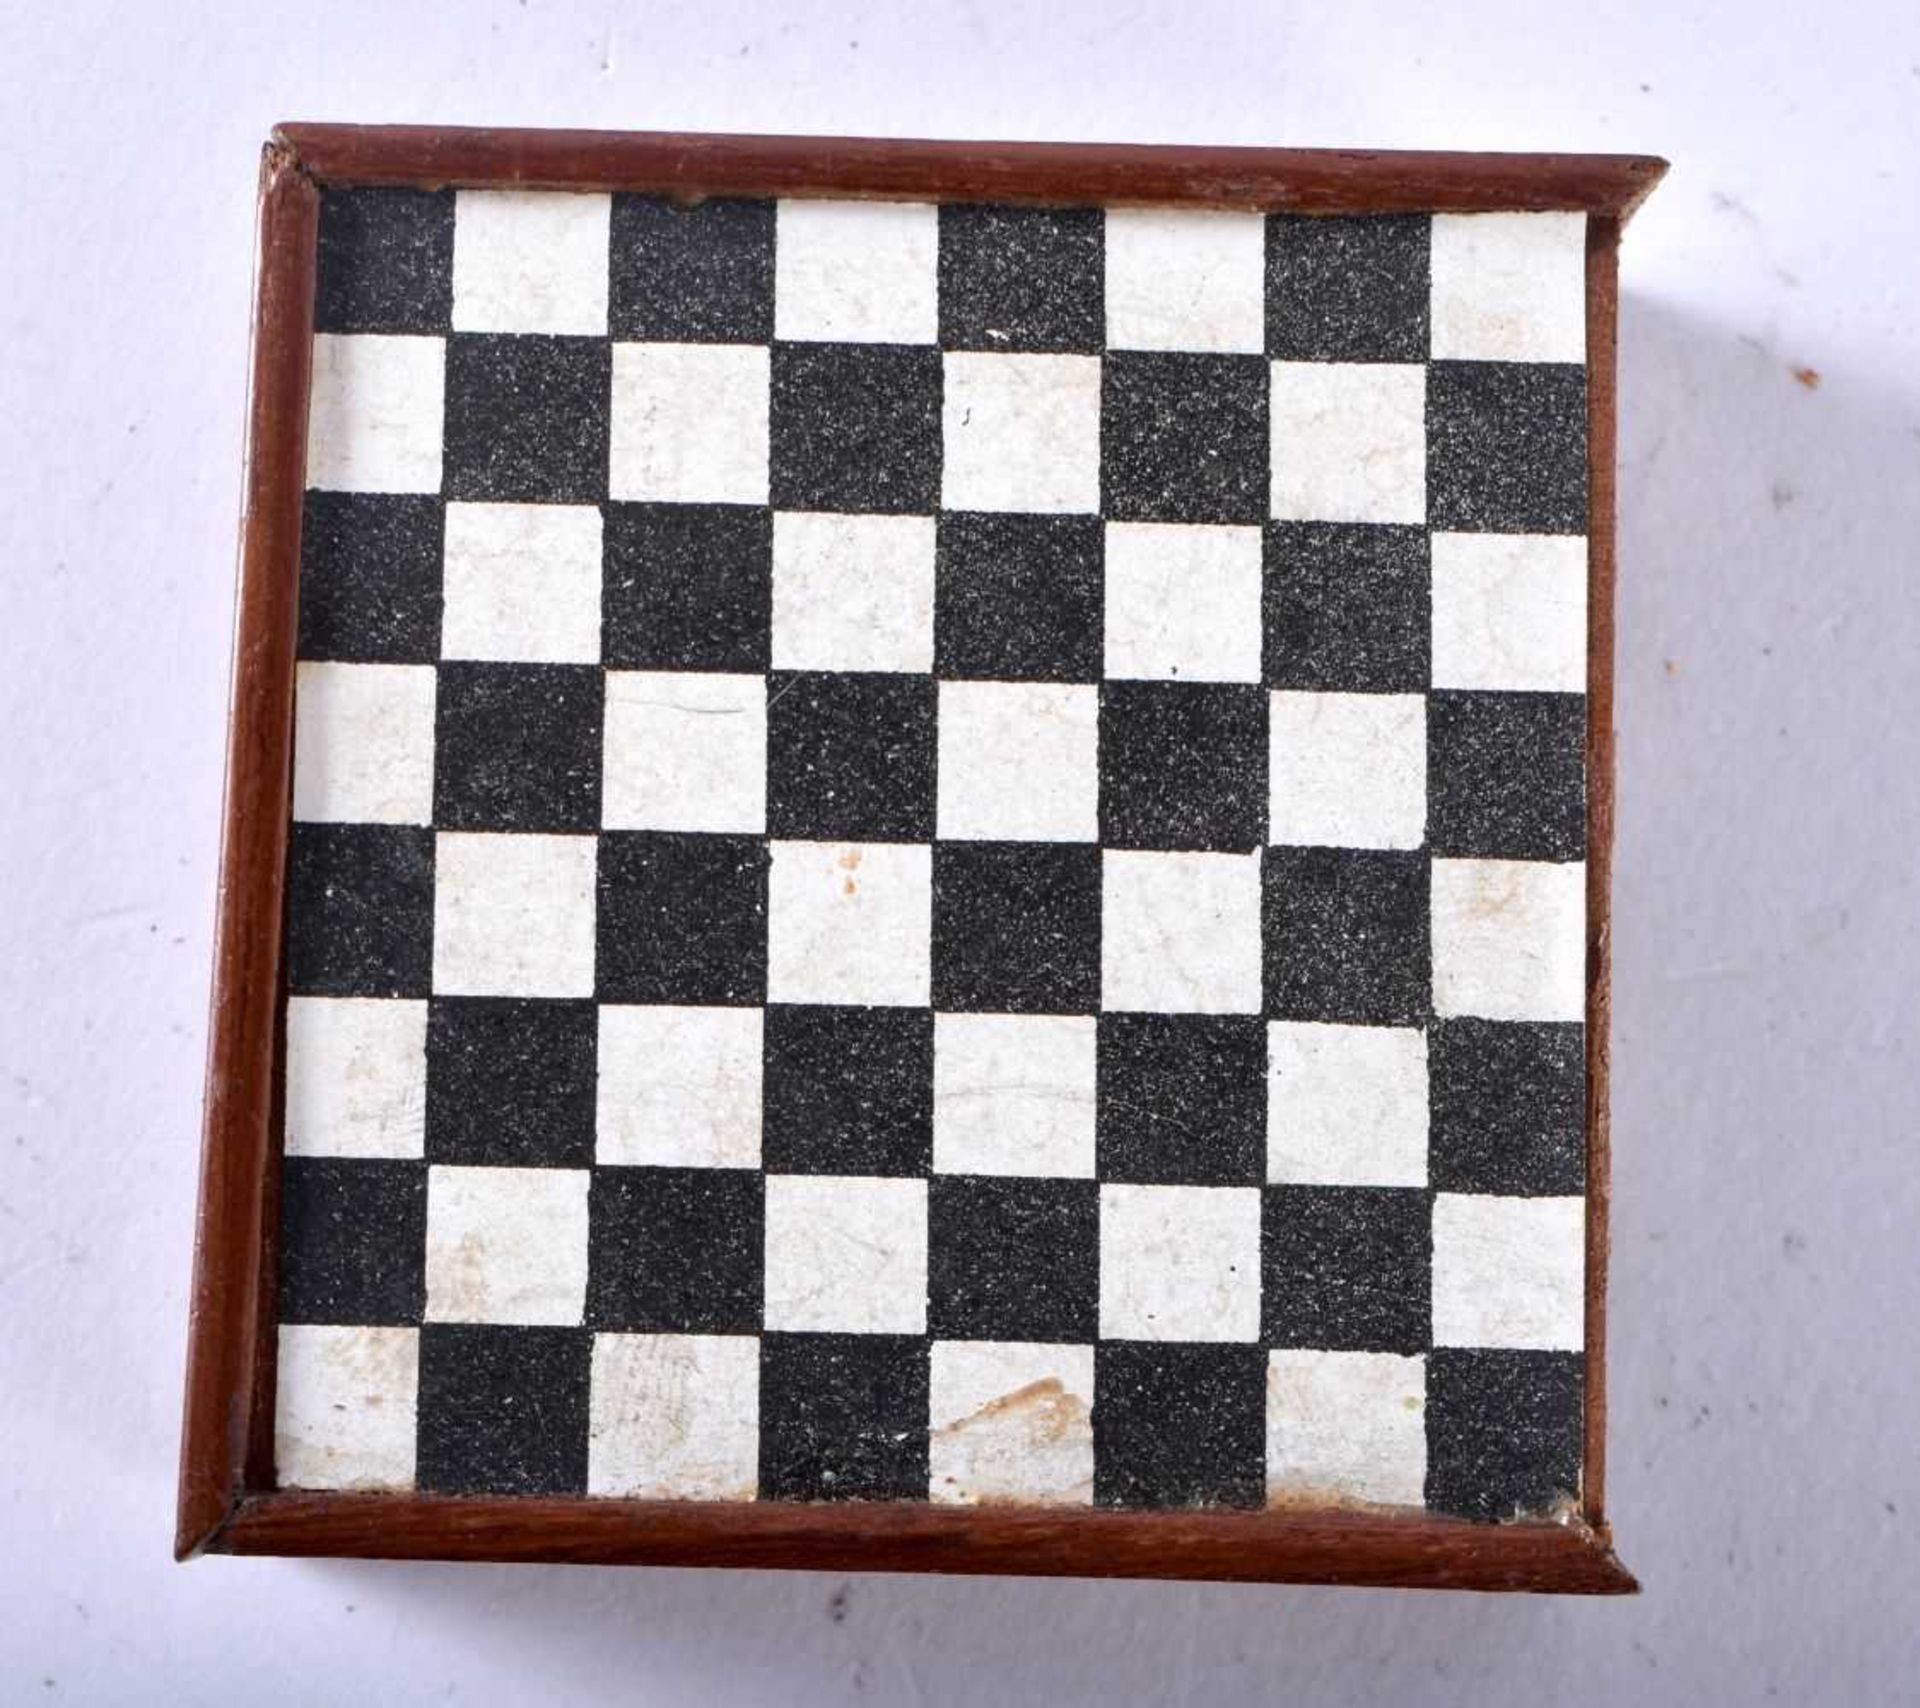 A MINIATURE GAMING BOARD. 5.5 cm square. - Image 4 of 4